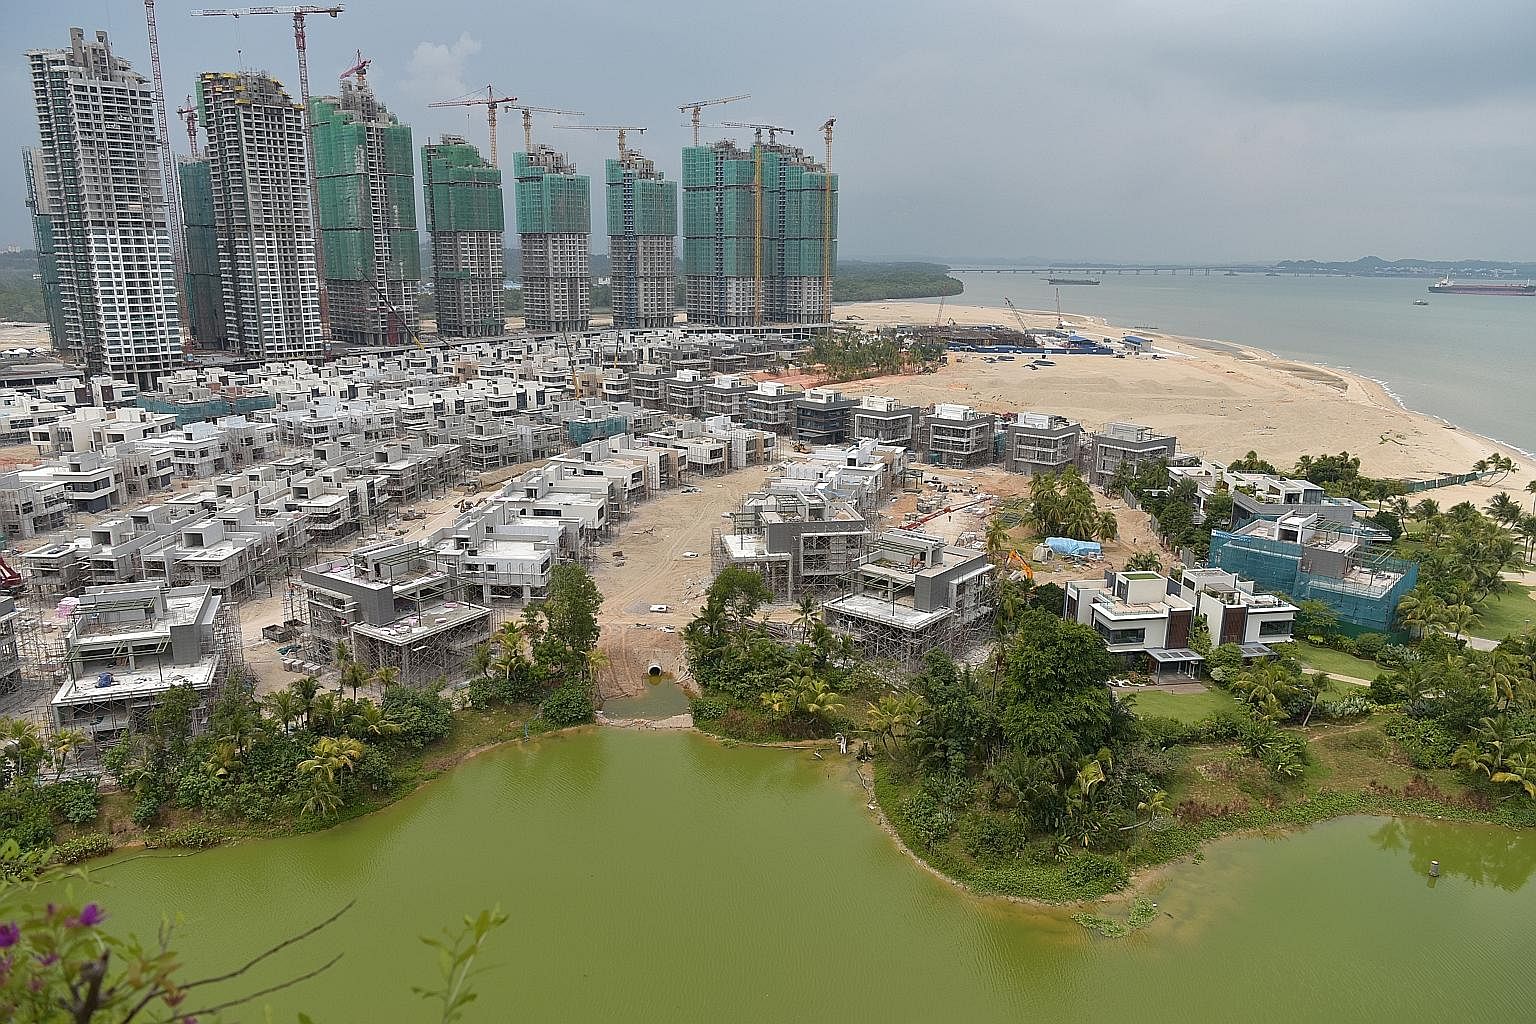 Forest City - a mixed-use development with homes, offices and shops on four artificial islands in Johor - is set to be built over 30 years. About 20,000 units were launched for sale by the end of last year, of which about 18,000 were sold.